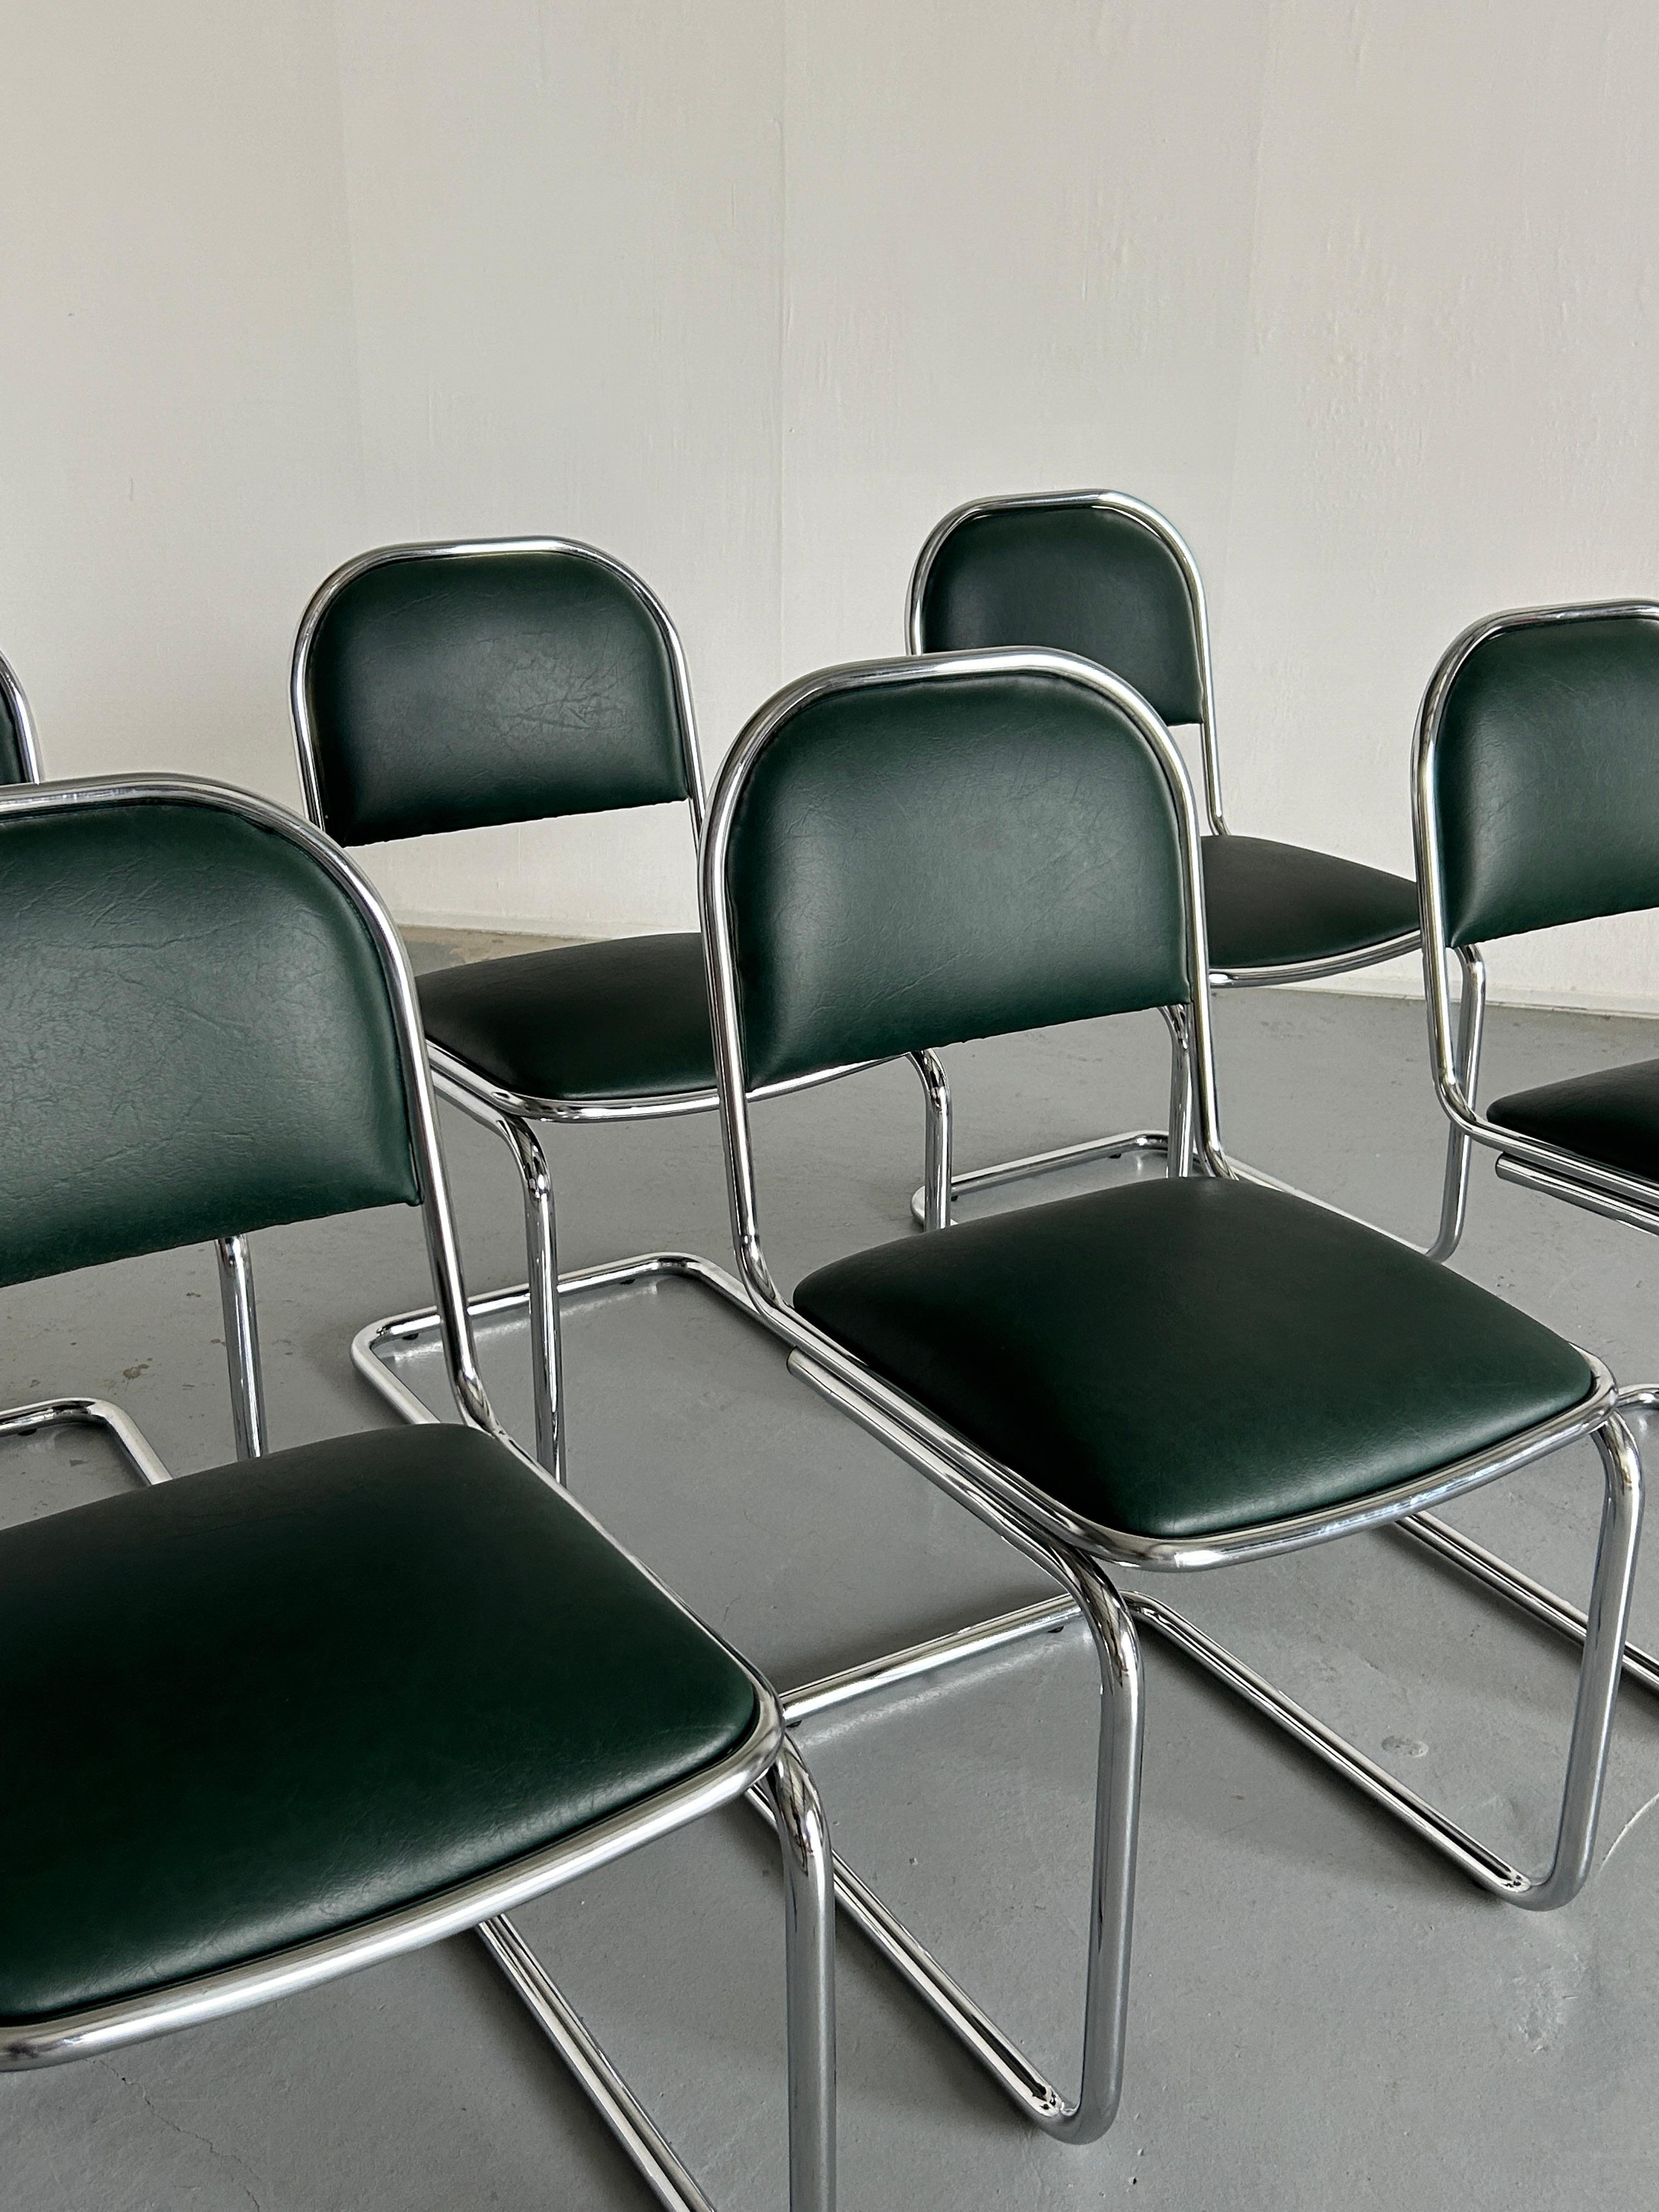  1 of 6 Bauhaus Design Chrome Tubular Steel and Green Faux Leather Chairs, 1980s For Sale 1